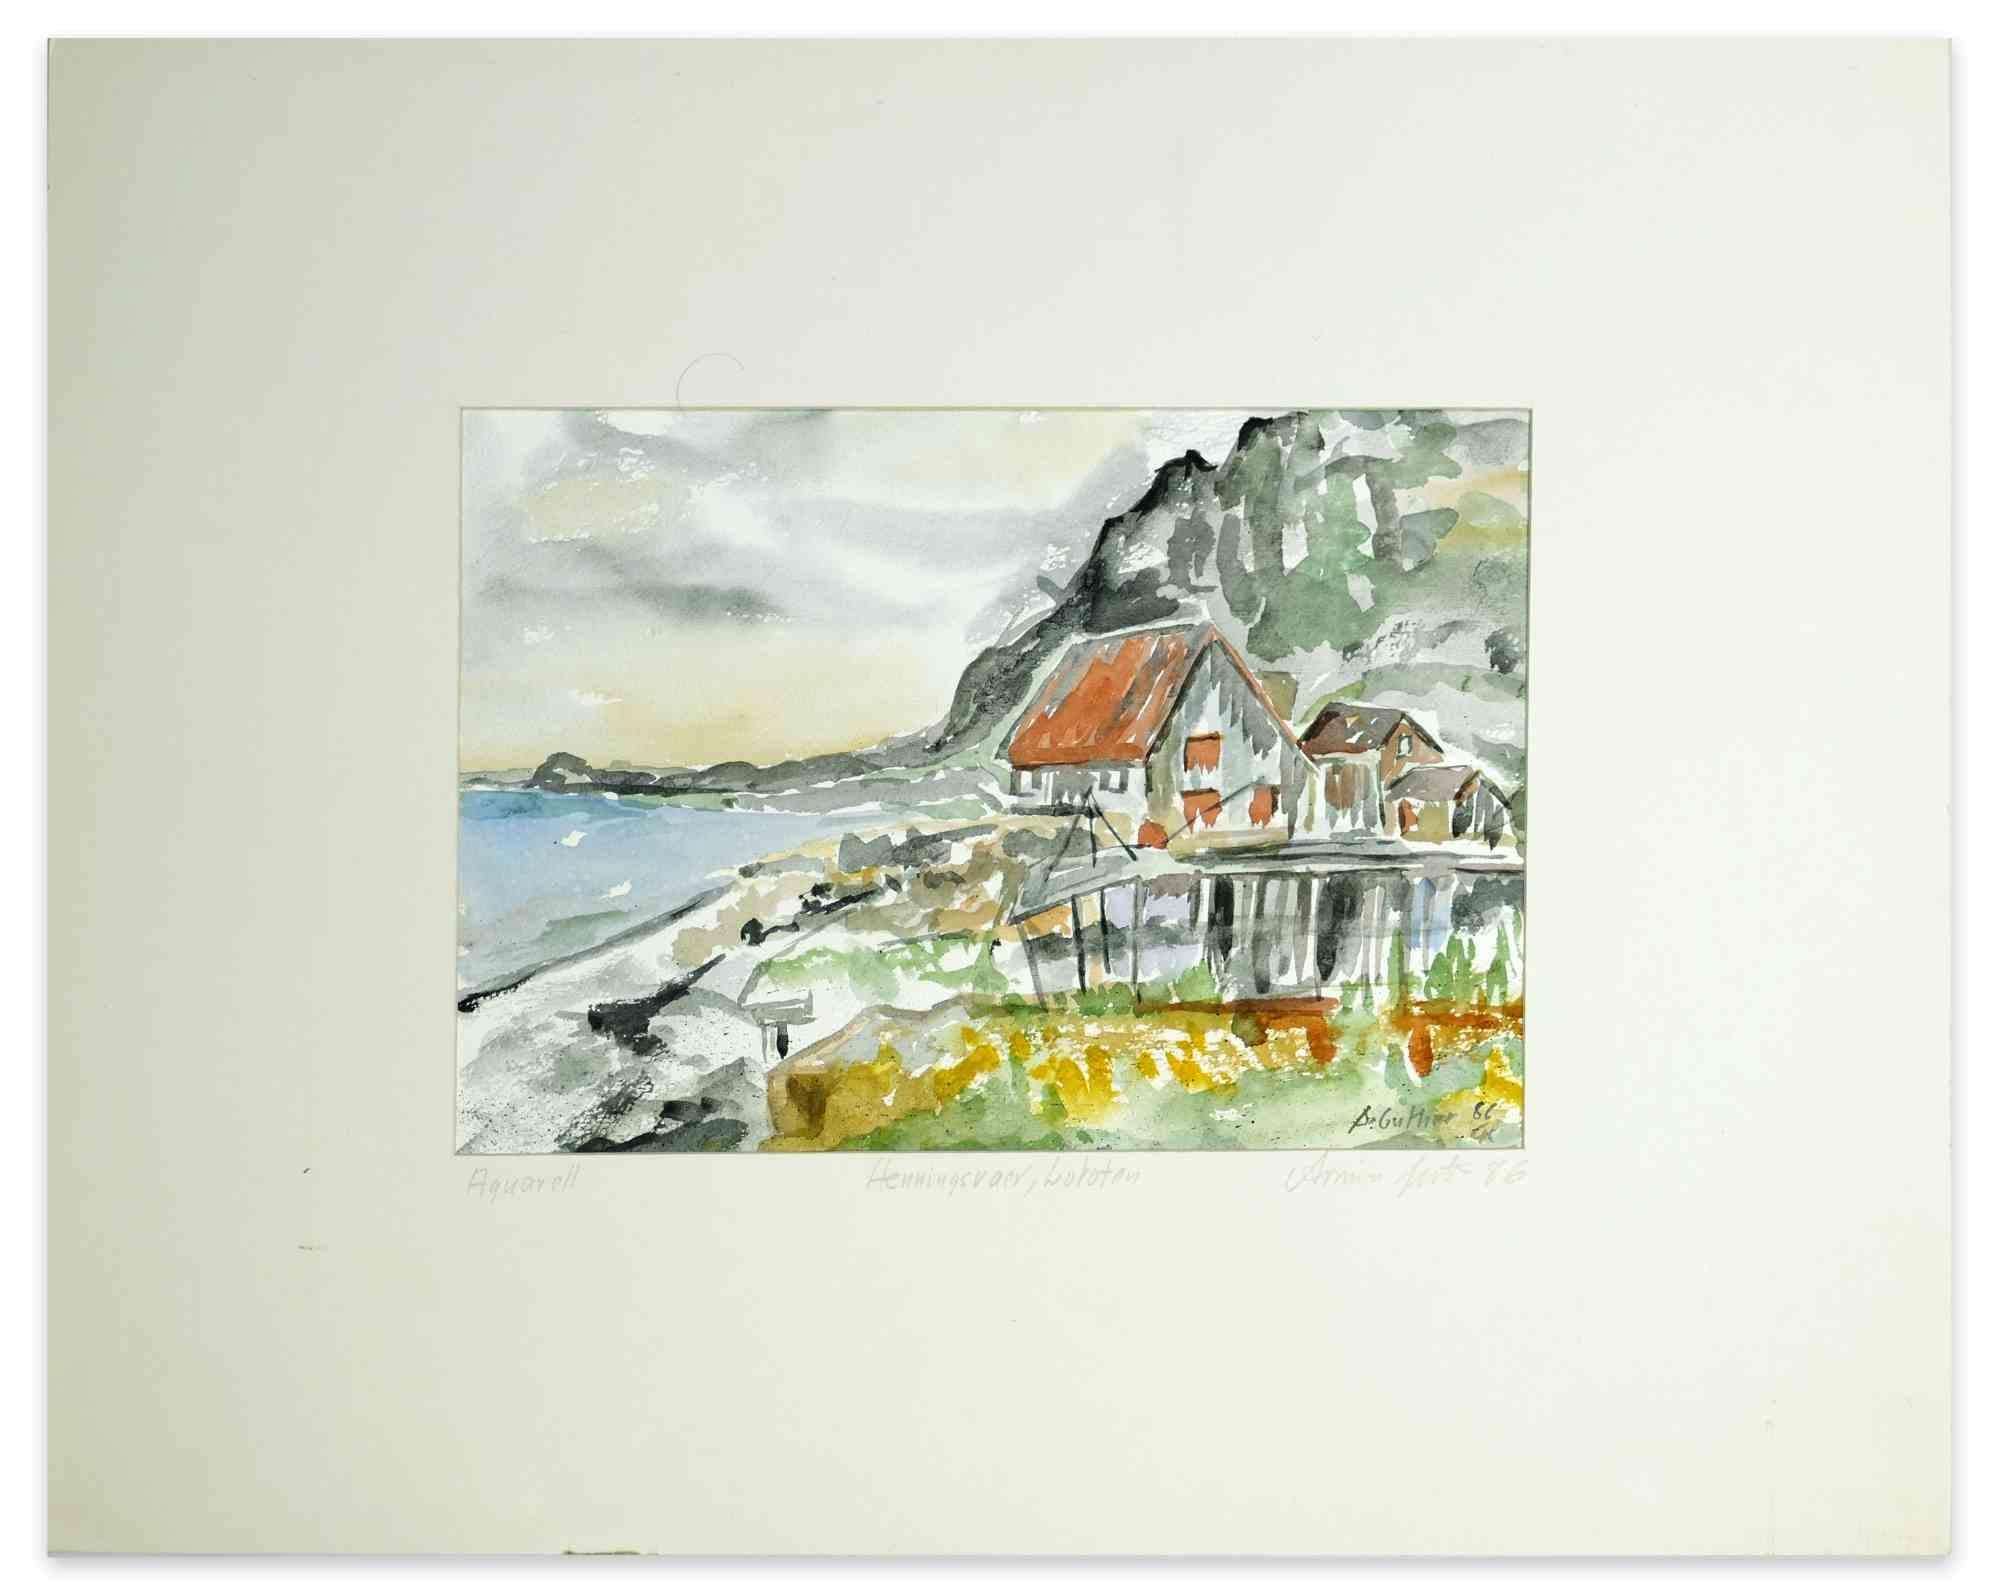 View of Henningsvaer Lofoten - Watercolor by Armin Guther - 1986